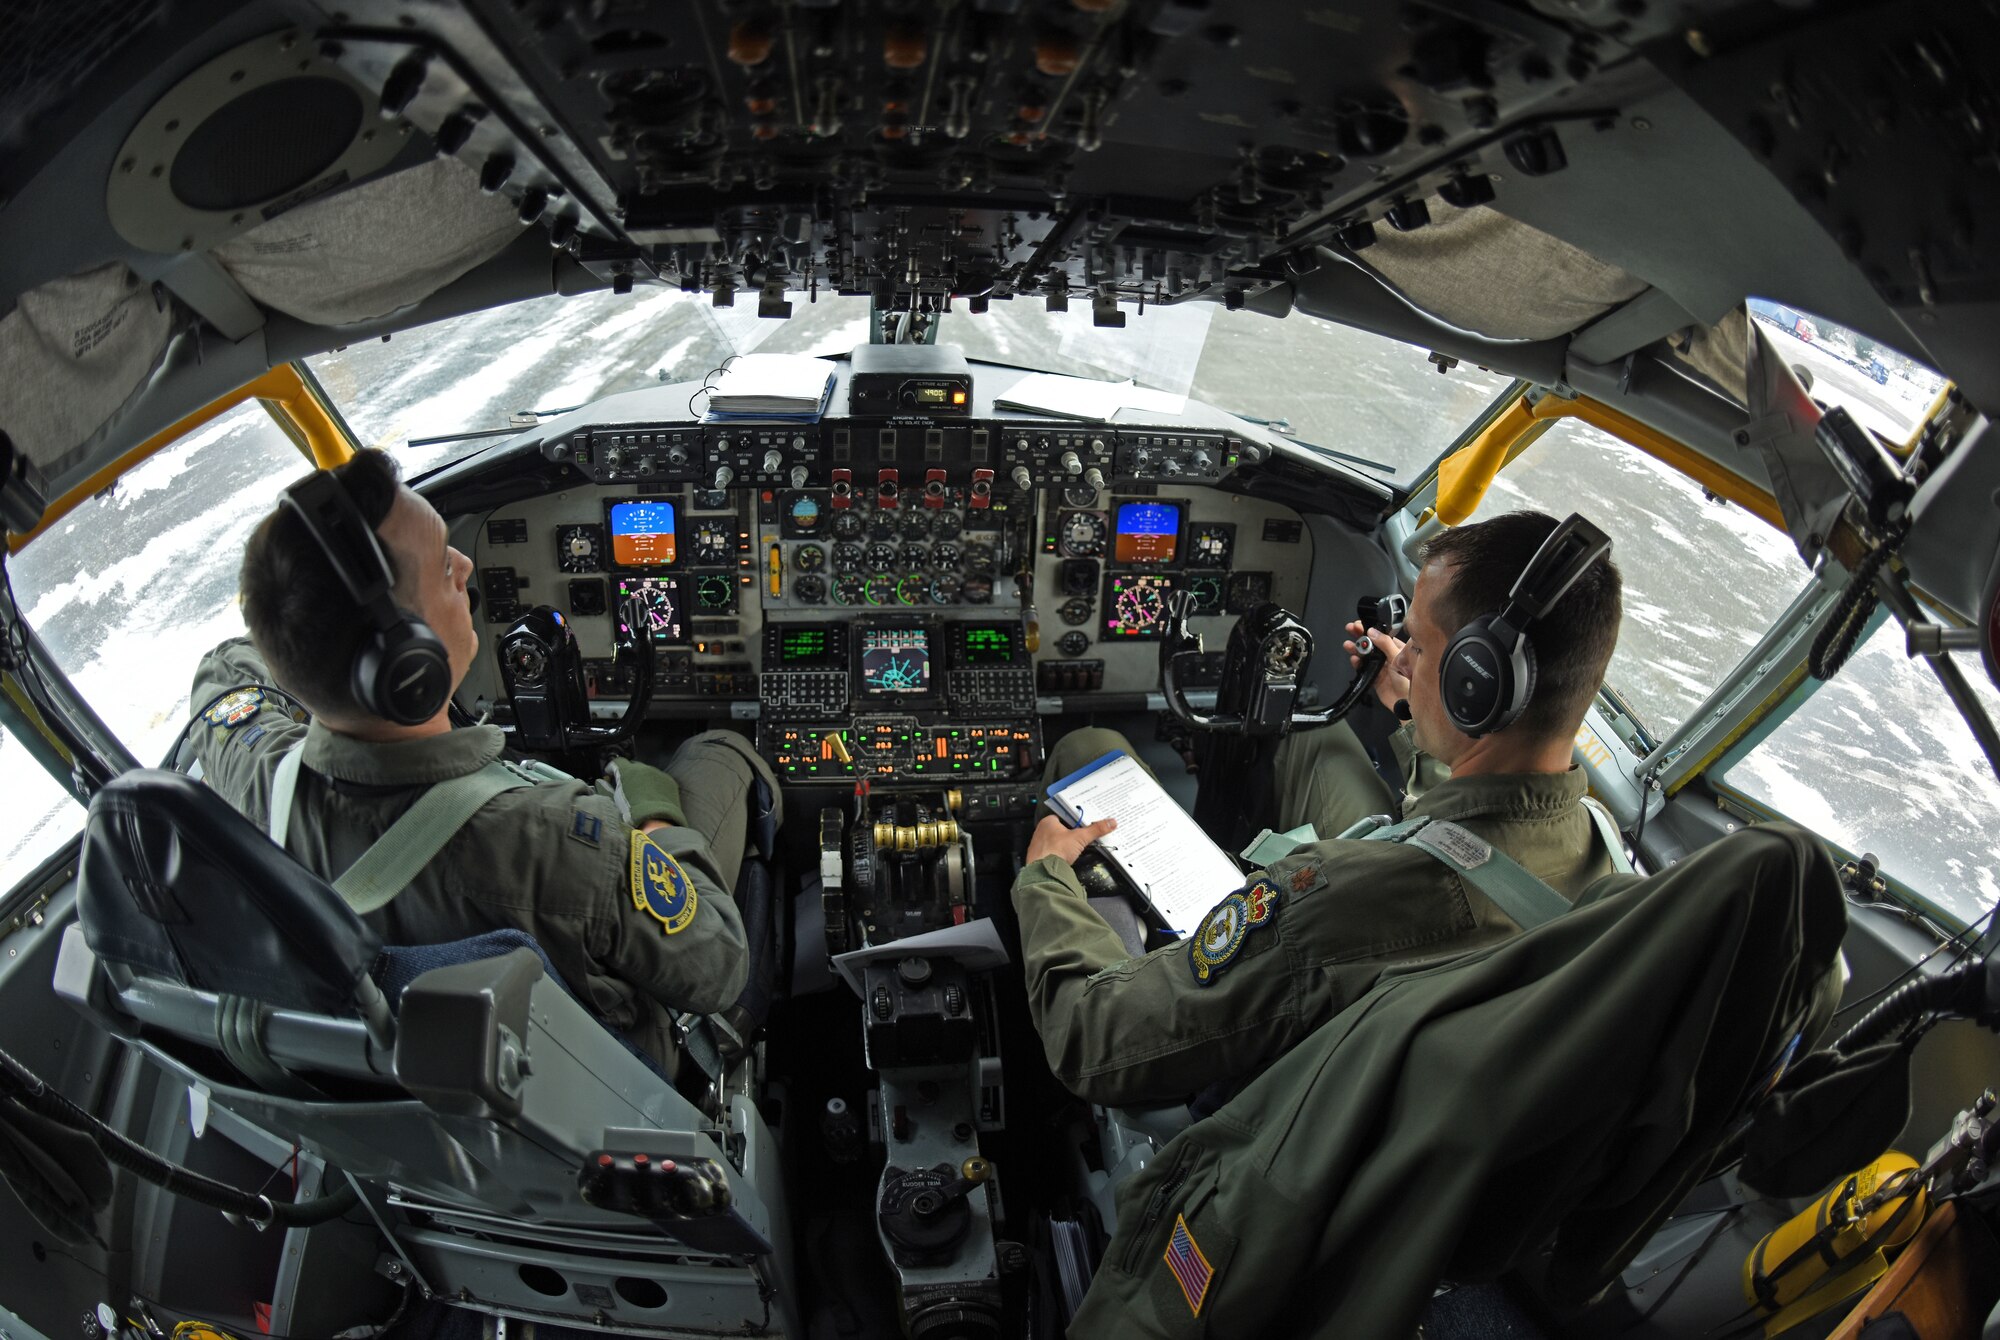 U.S. Air Force Capt. Frank Simon and U.S. Air Force Maj. Micah Yost, 351st Air Refueling Squadron pilots, perform preflight checks before conducting aerial refueling training during Exercise Trident Juncture 18, at Rovaniemi, Finland, Oct. 27, 2018. Trident Juncture is the largest NATO exercise since 2015, with participation of more than 50,000 military members from 31 nations. The 100th Air Refueling Wing supported the exercise with two KC-135s and crew. (U.S. Air Force photo by Senior Airman Luke Milano)